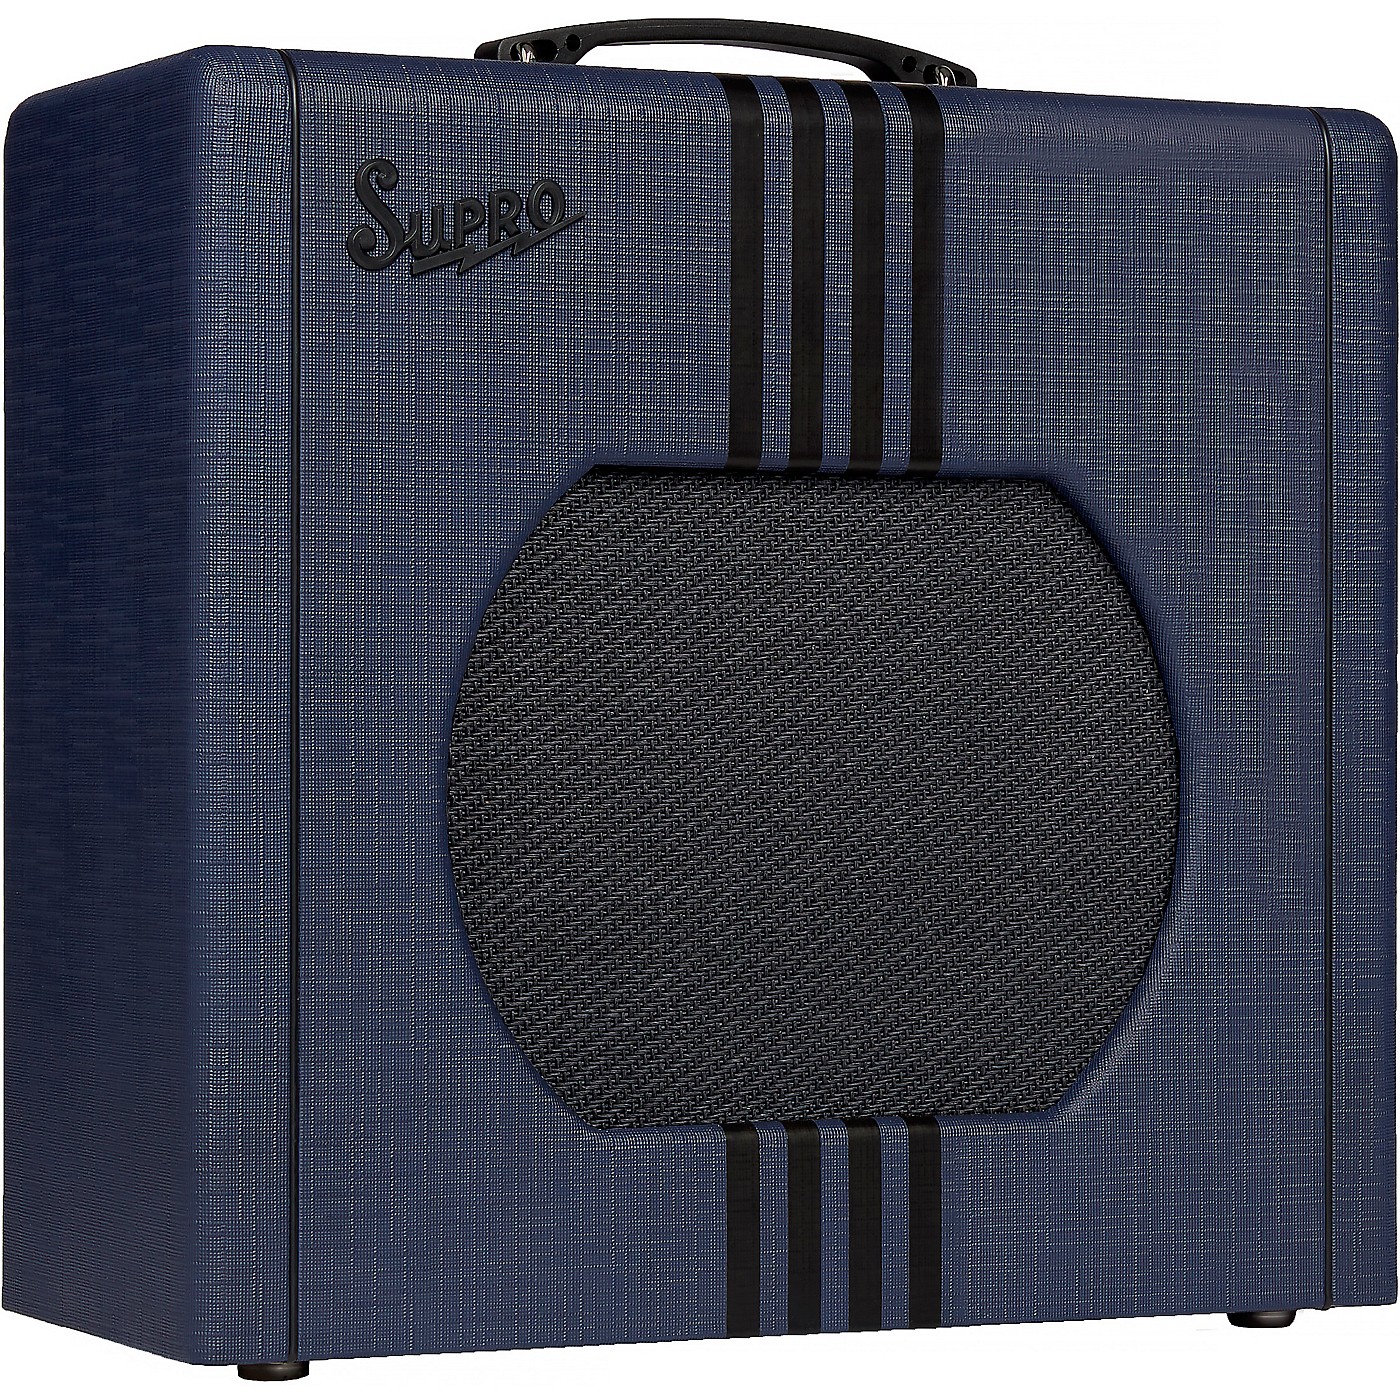 Supro Limited-Edition 1822 Delta King 12 15W 1x12 Tube Guitar Amp thumbnail